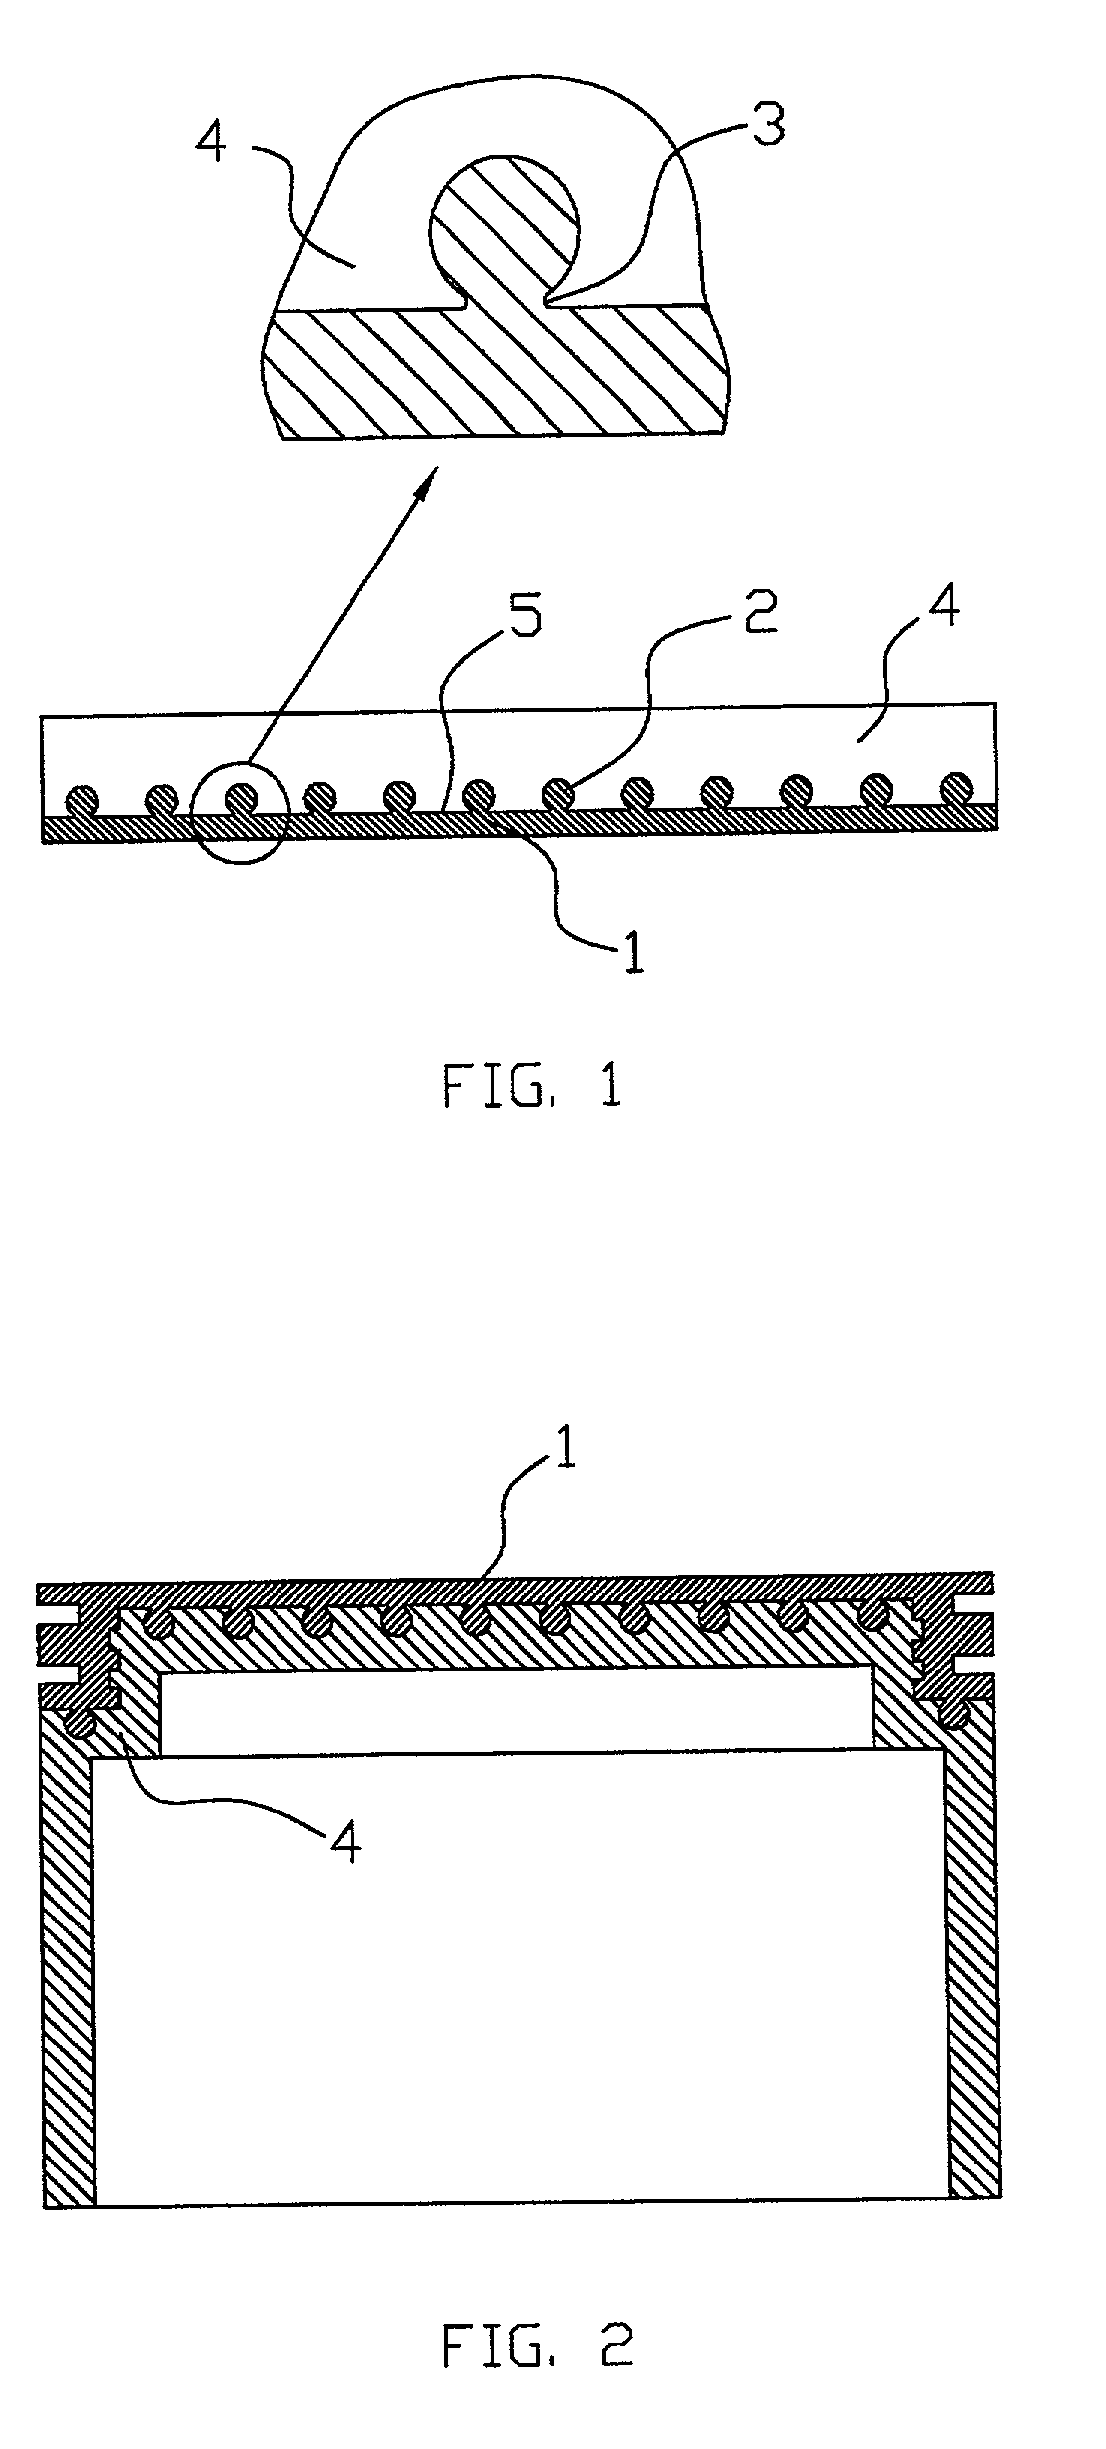 Method for manufacturing clad components